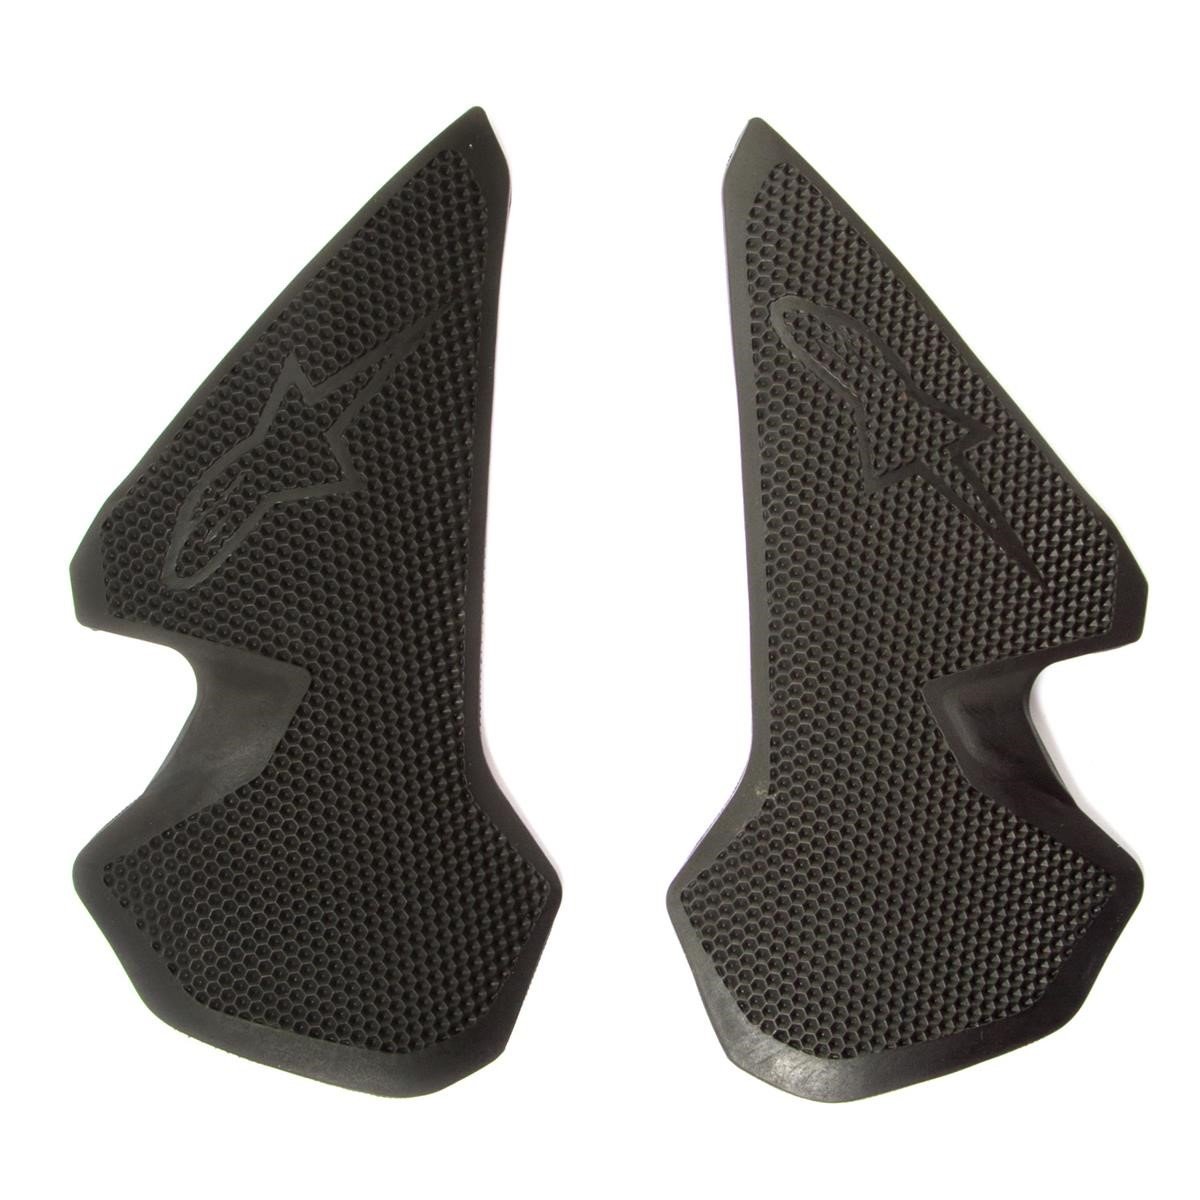 Alpinestars Replacement Boot Protector Tech 10 Medial Protector Rubber Insert Black